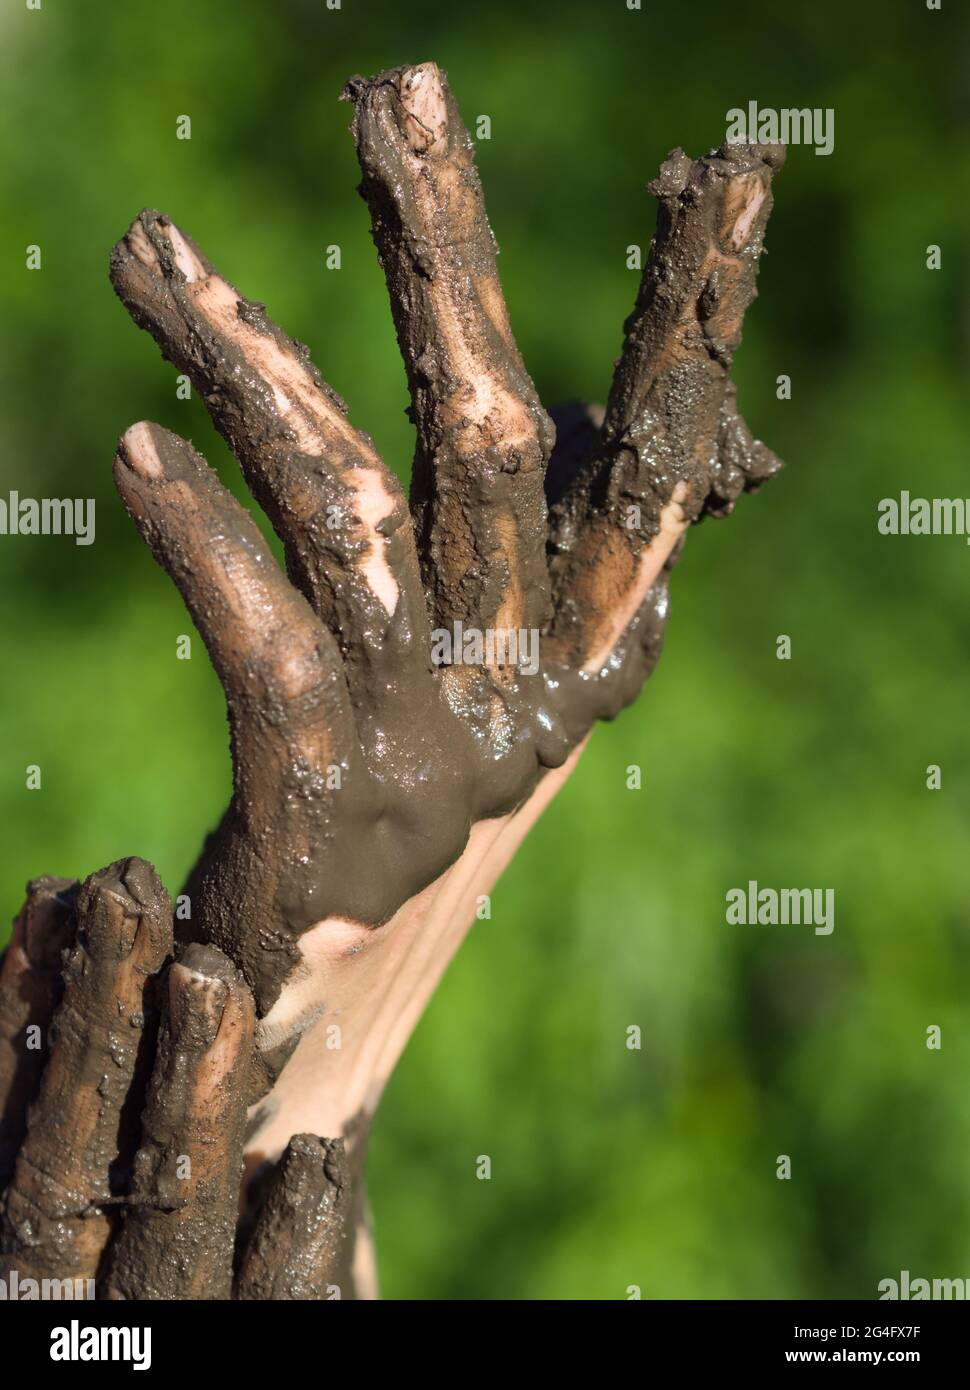 Dirty Wet Muddy Hands of a Young Woman Outdoors on a Sunny Summer Day Stock Photo